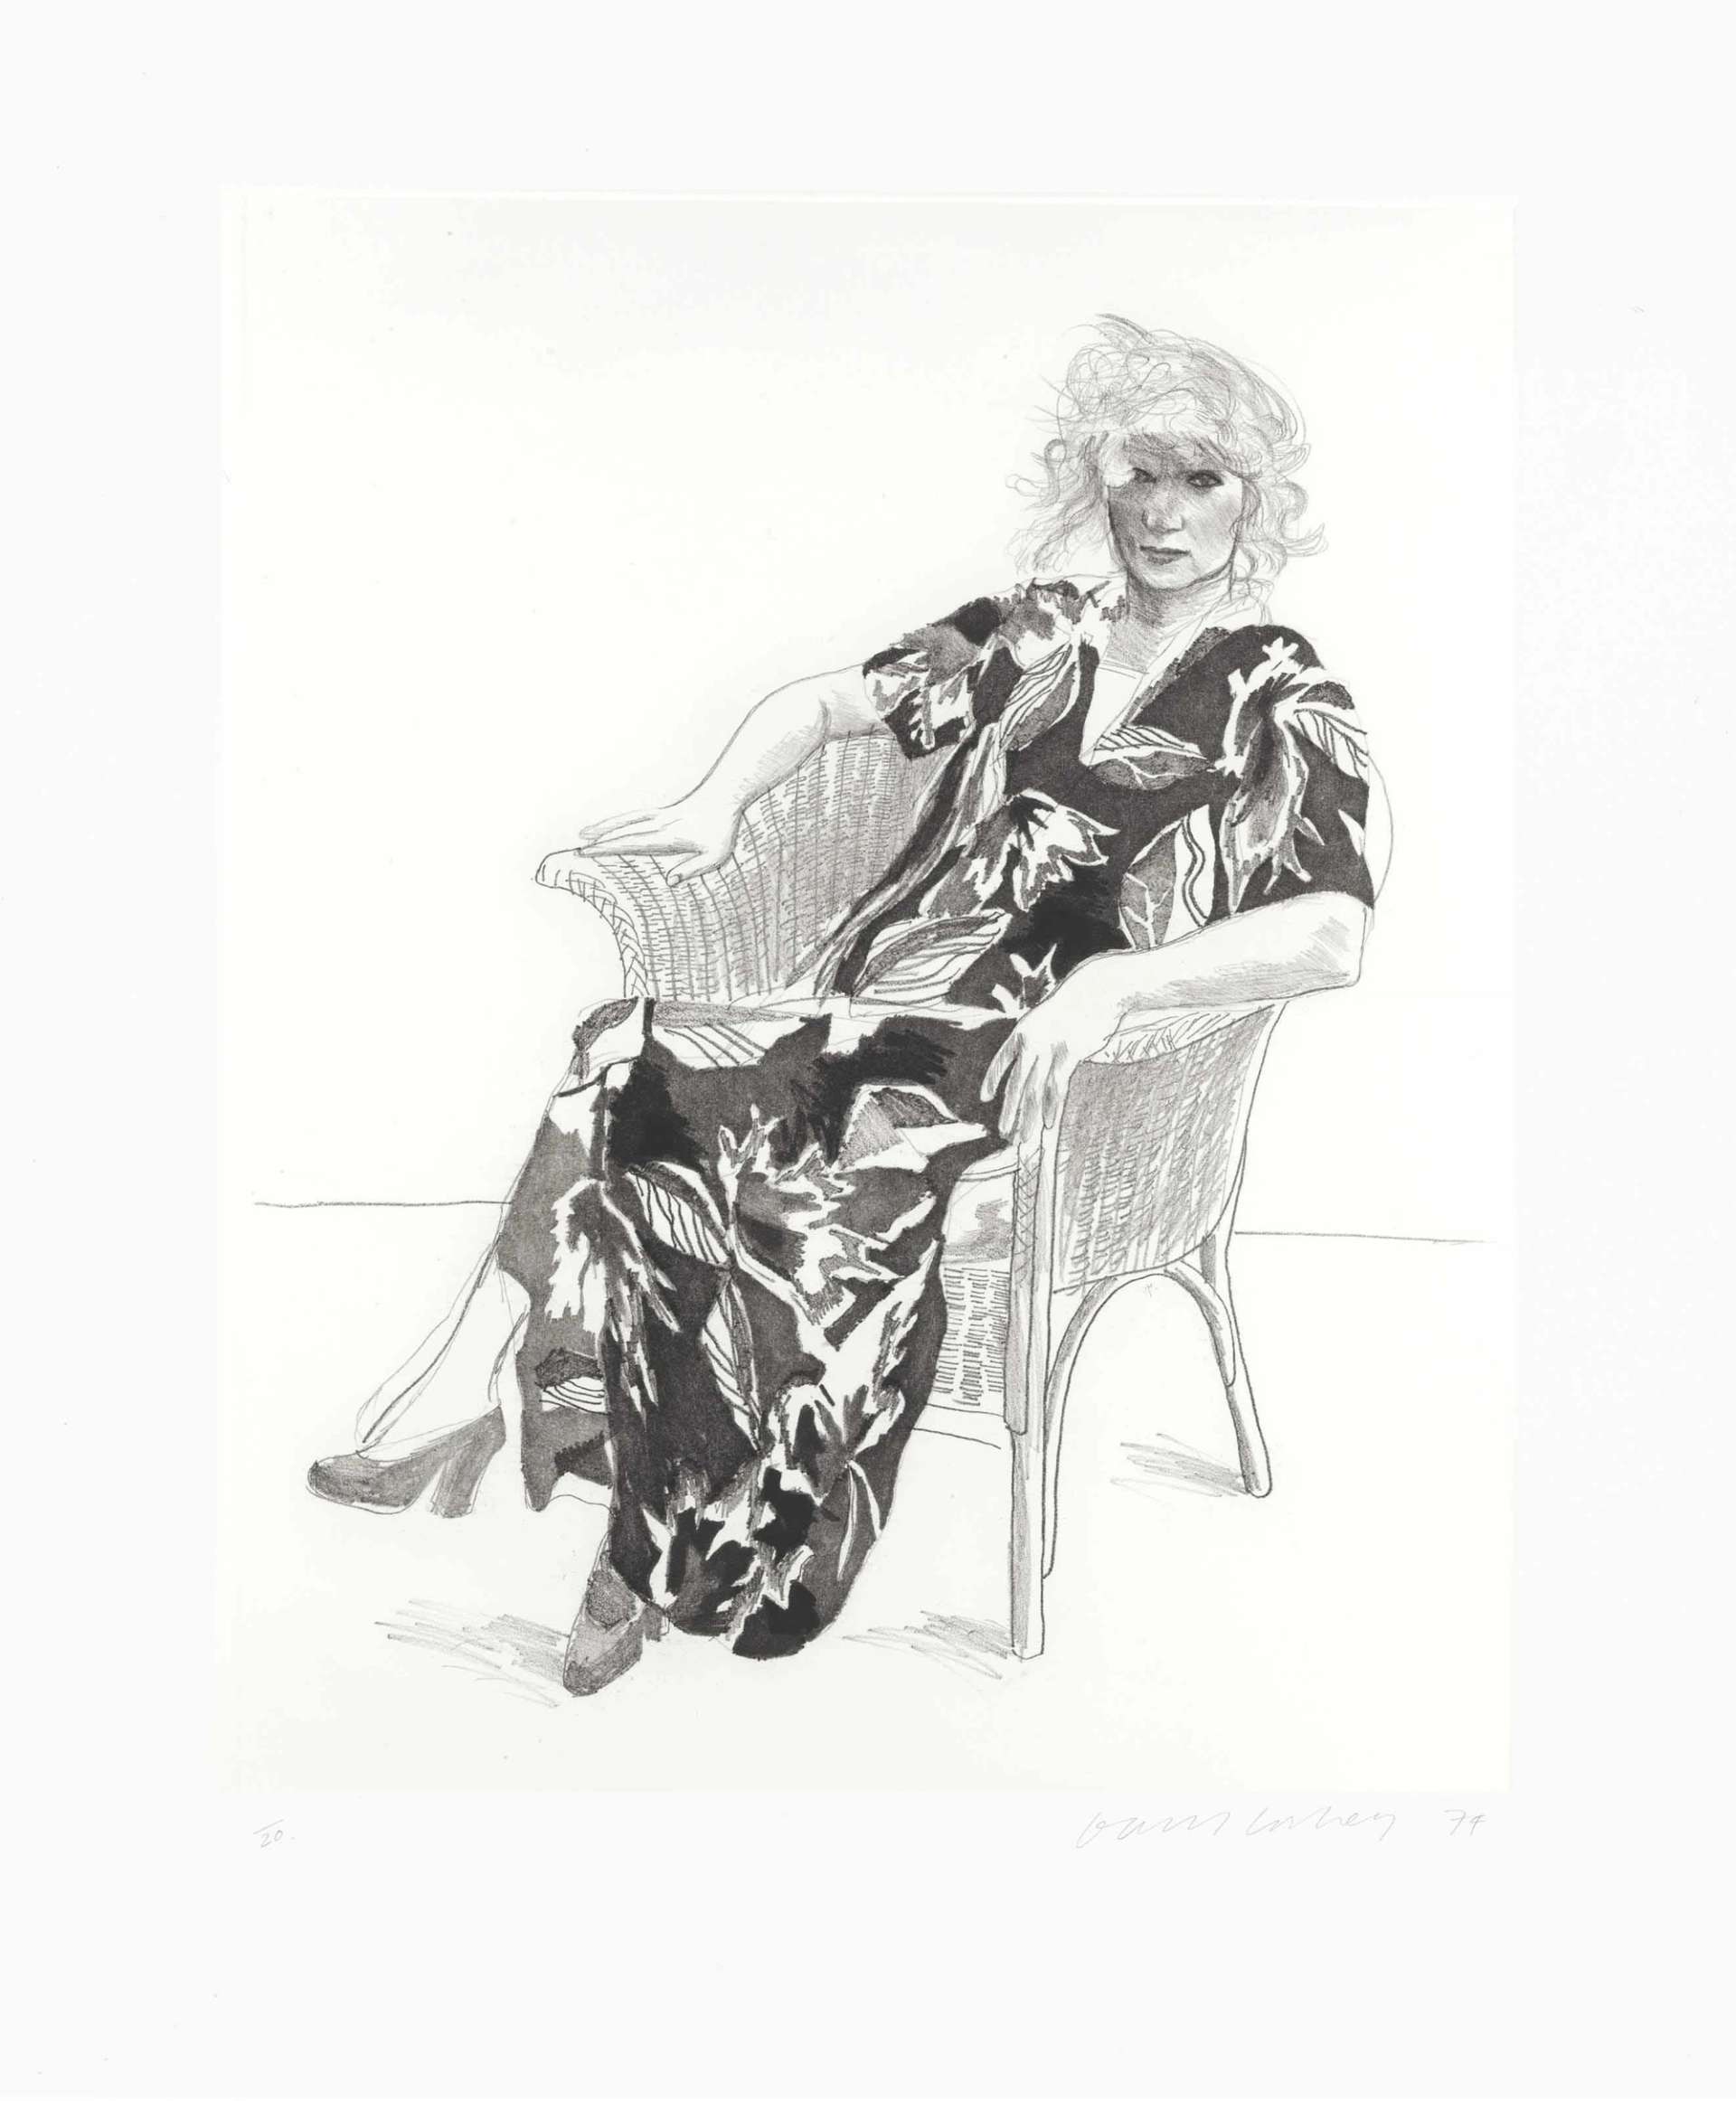 An etching by David Hockney depicting a female model in a floral dress sitting on a chair, executed in black ink against a white background